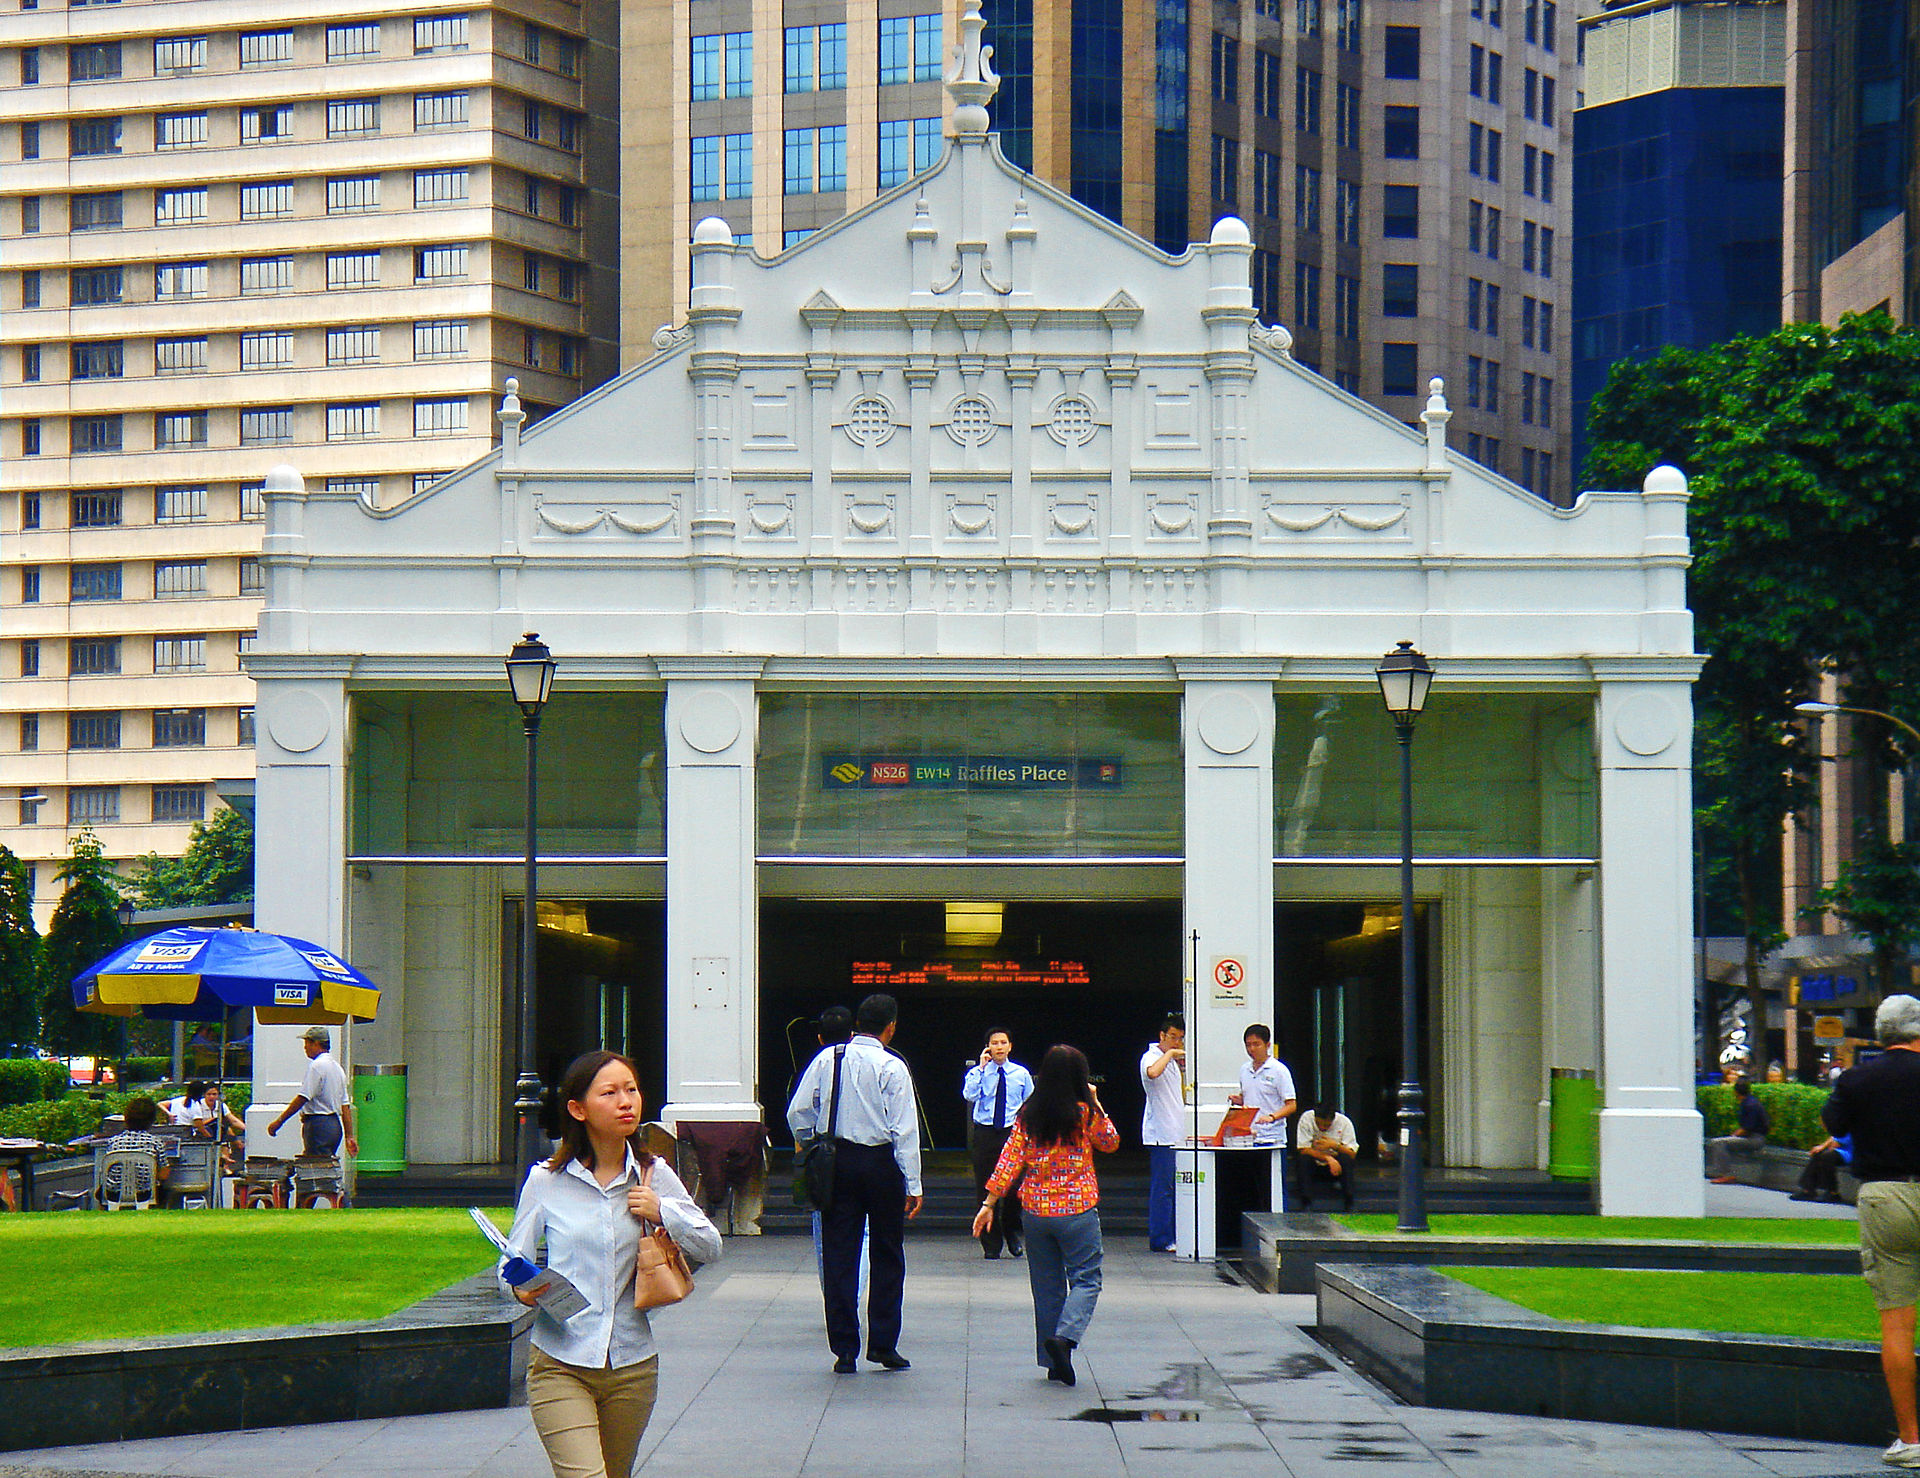 Raffles Place is centre of Financial District of Singapore